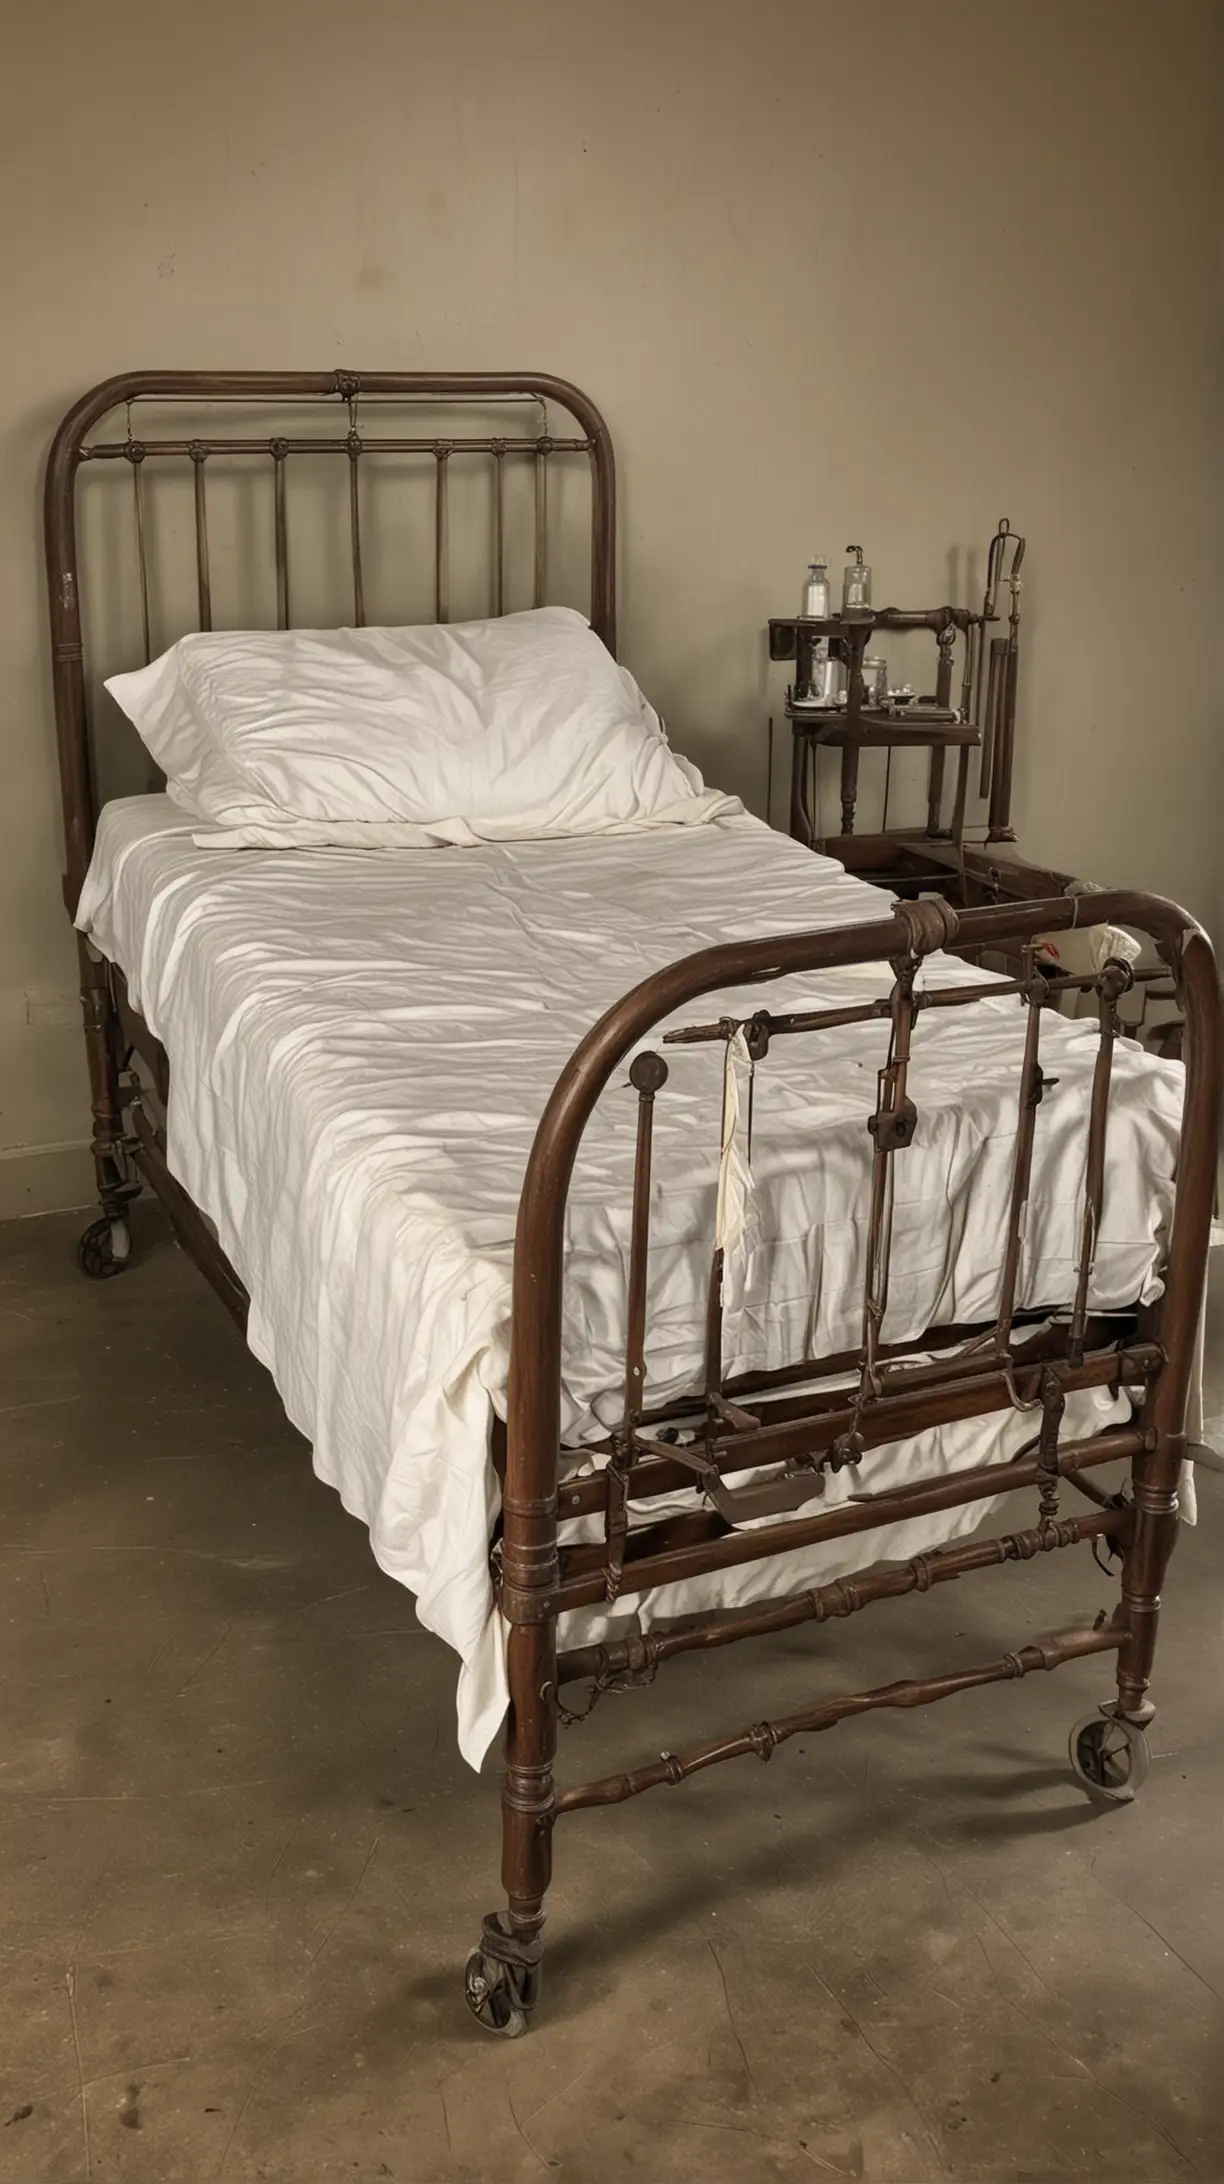 1800s hospital bed

